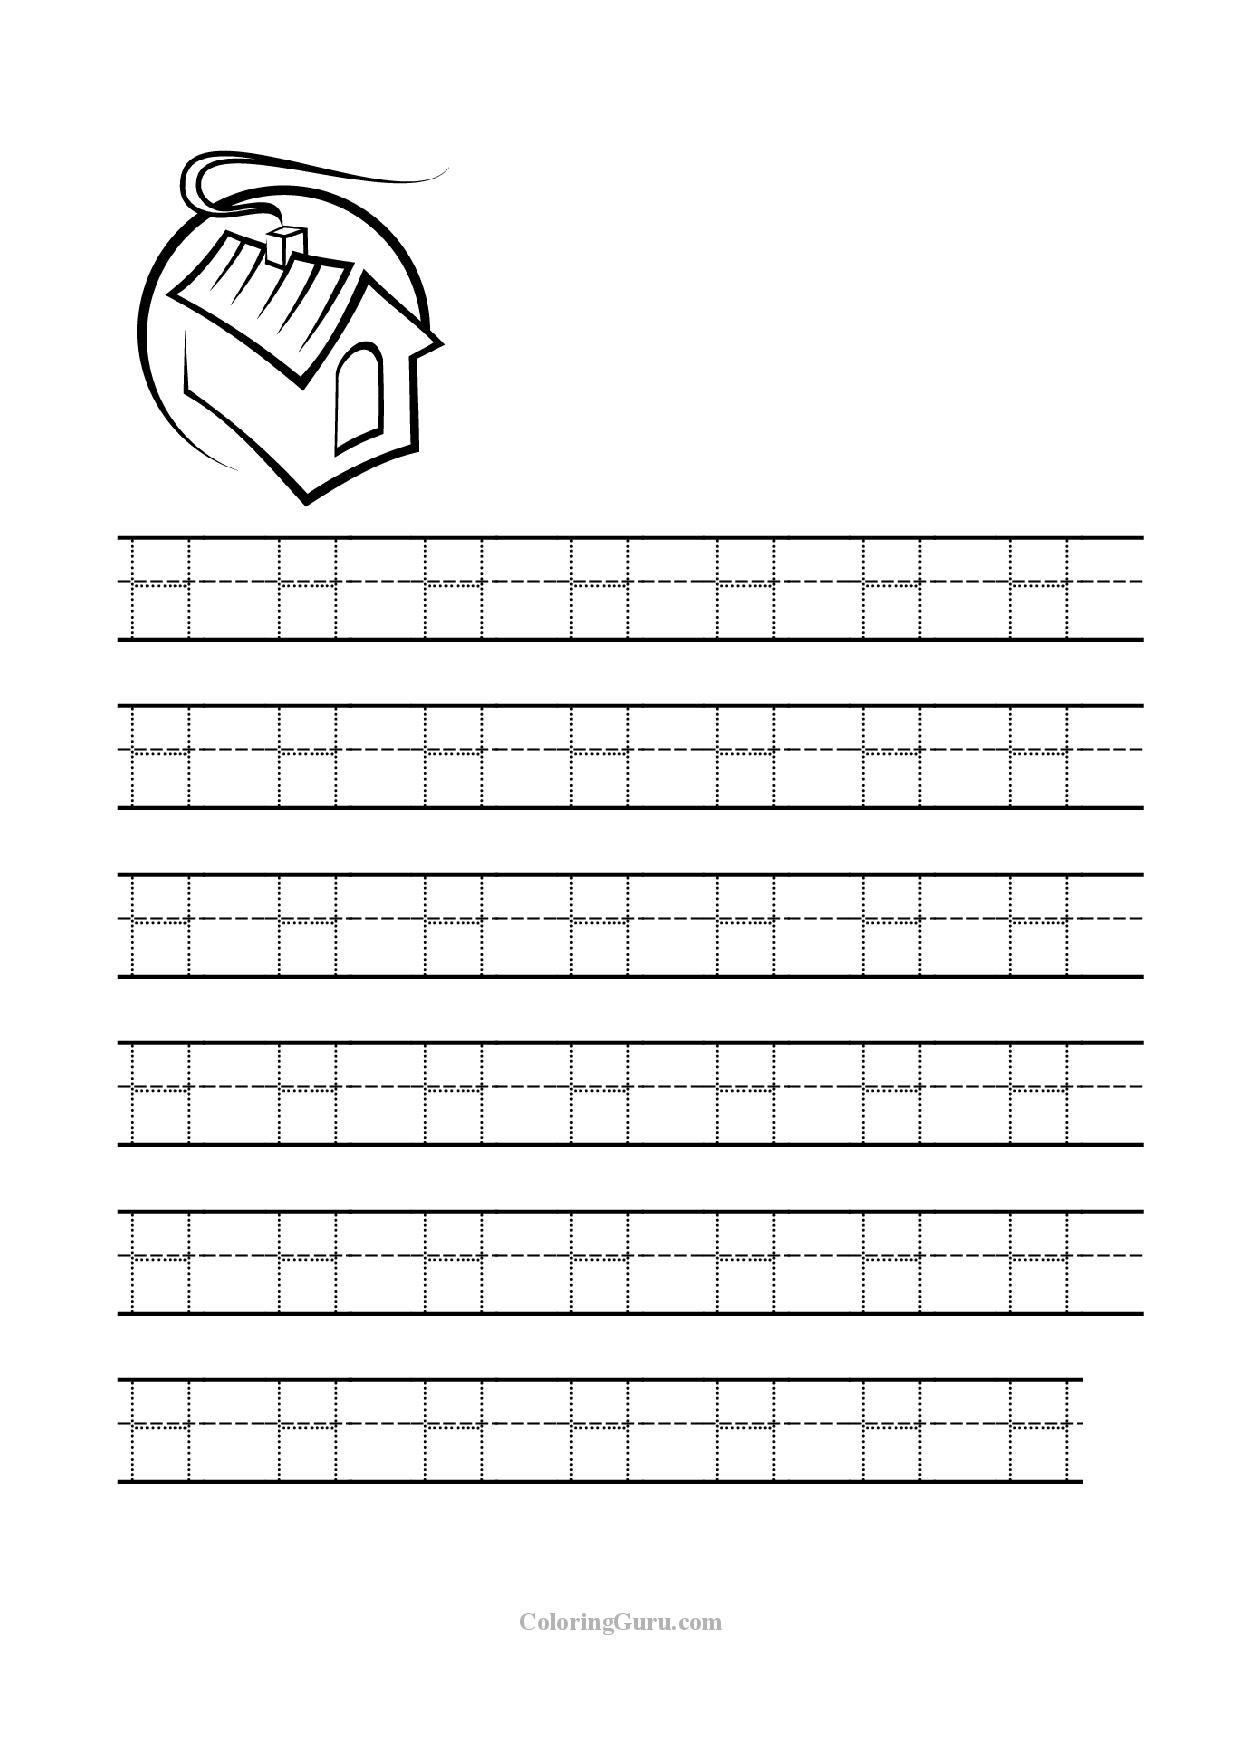 Free Printable Tracing Letter H Worksheets For Preschool regarding Letter H Worksheets For First Grade